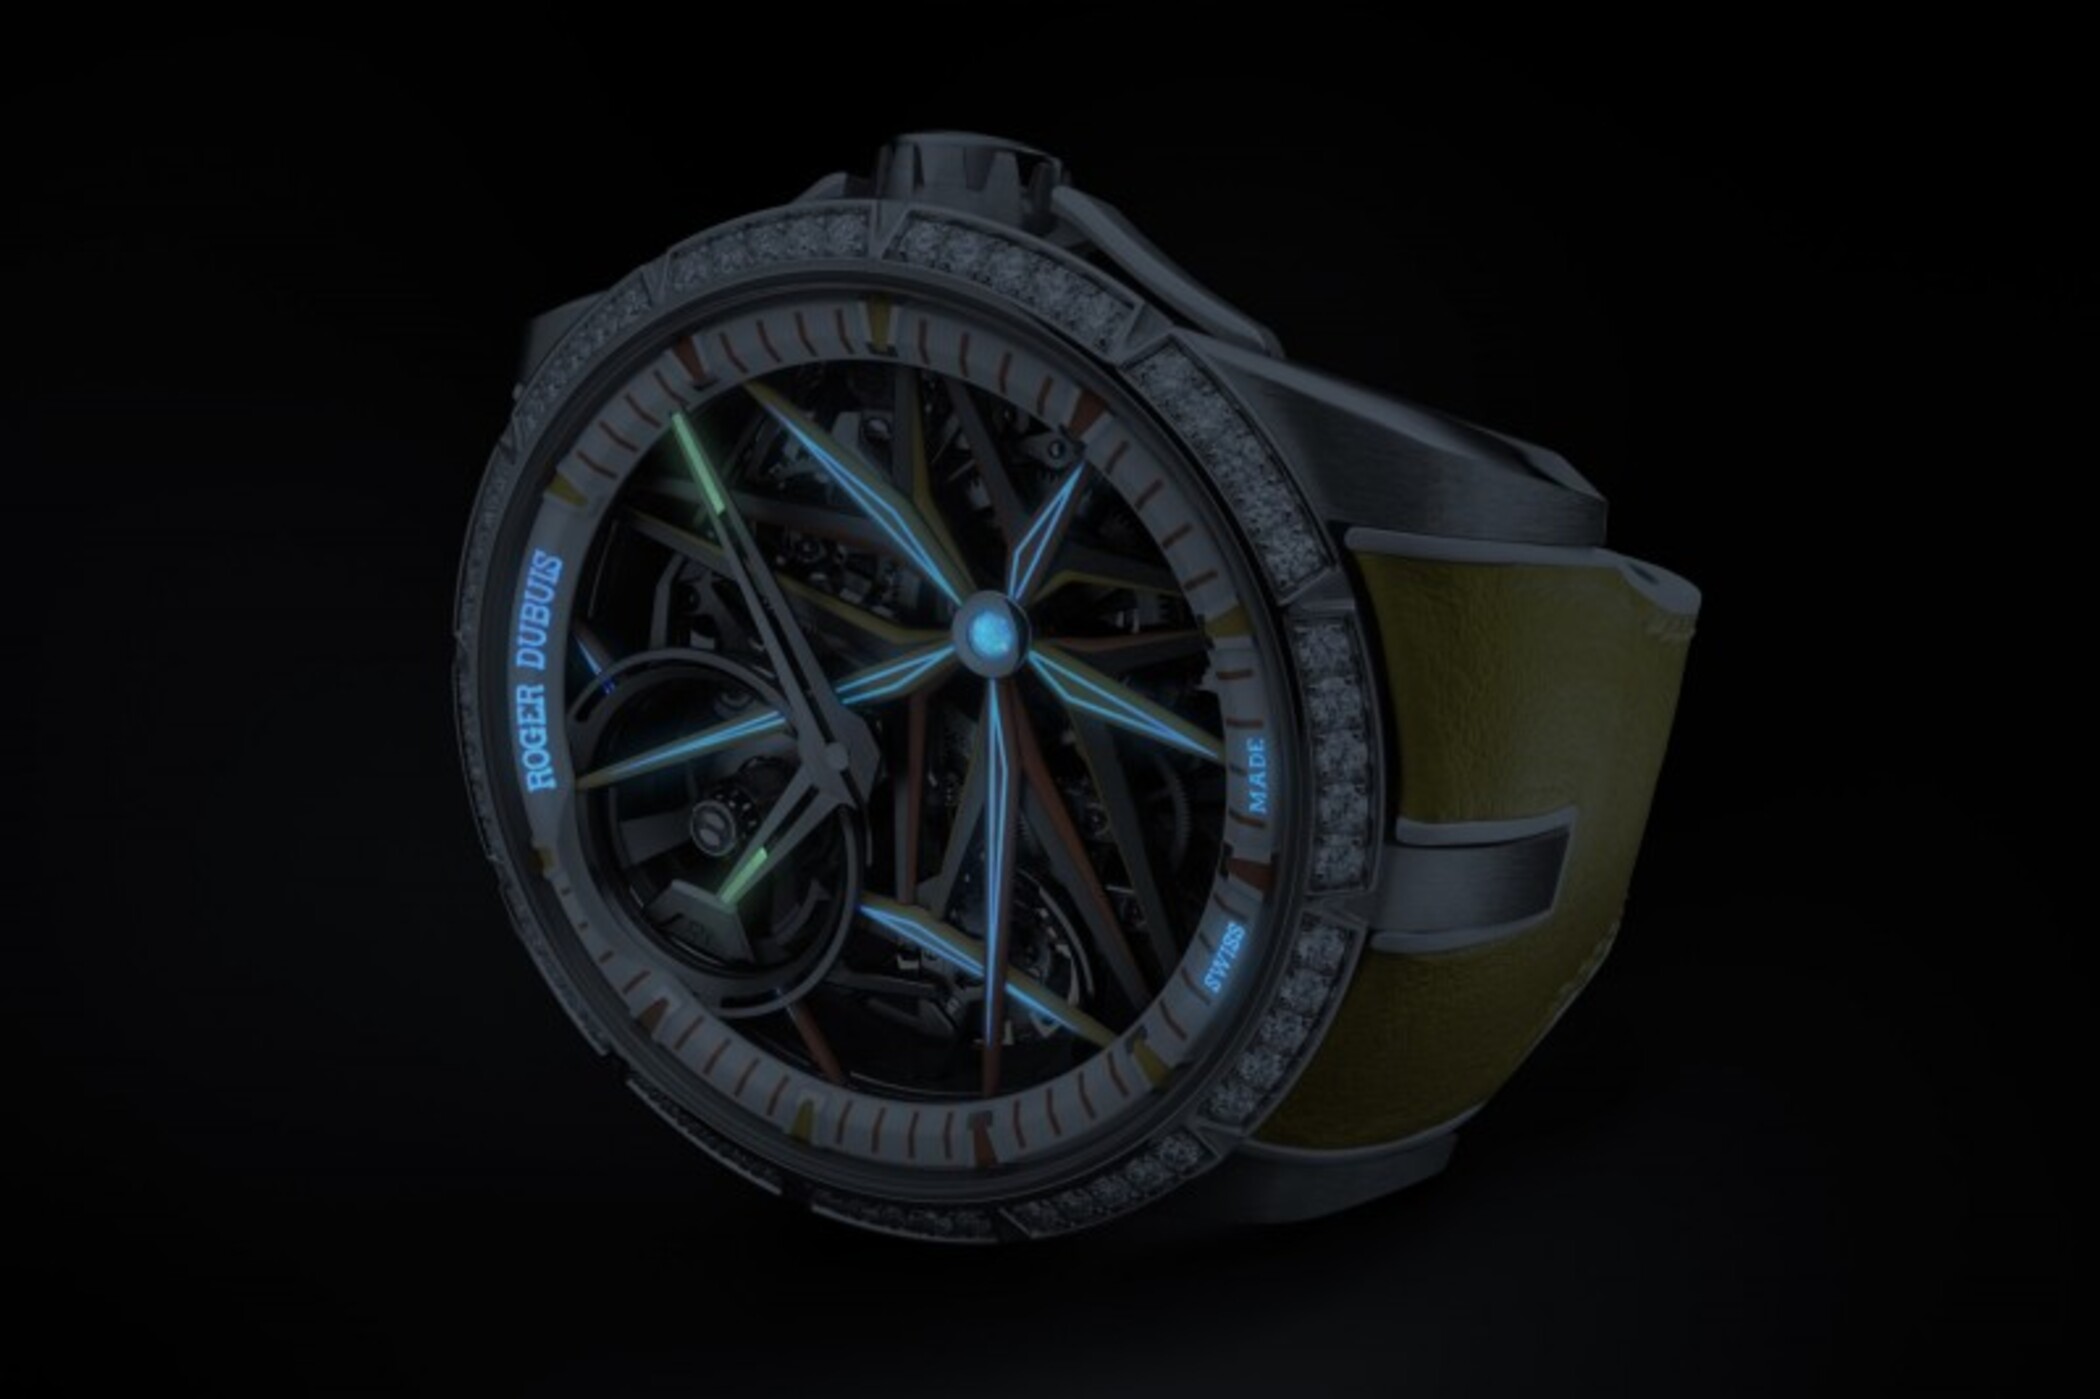 Introducing Roger Dubuis Excalibur Blacklight MB